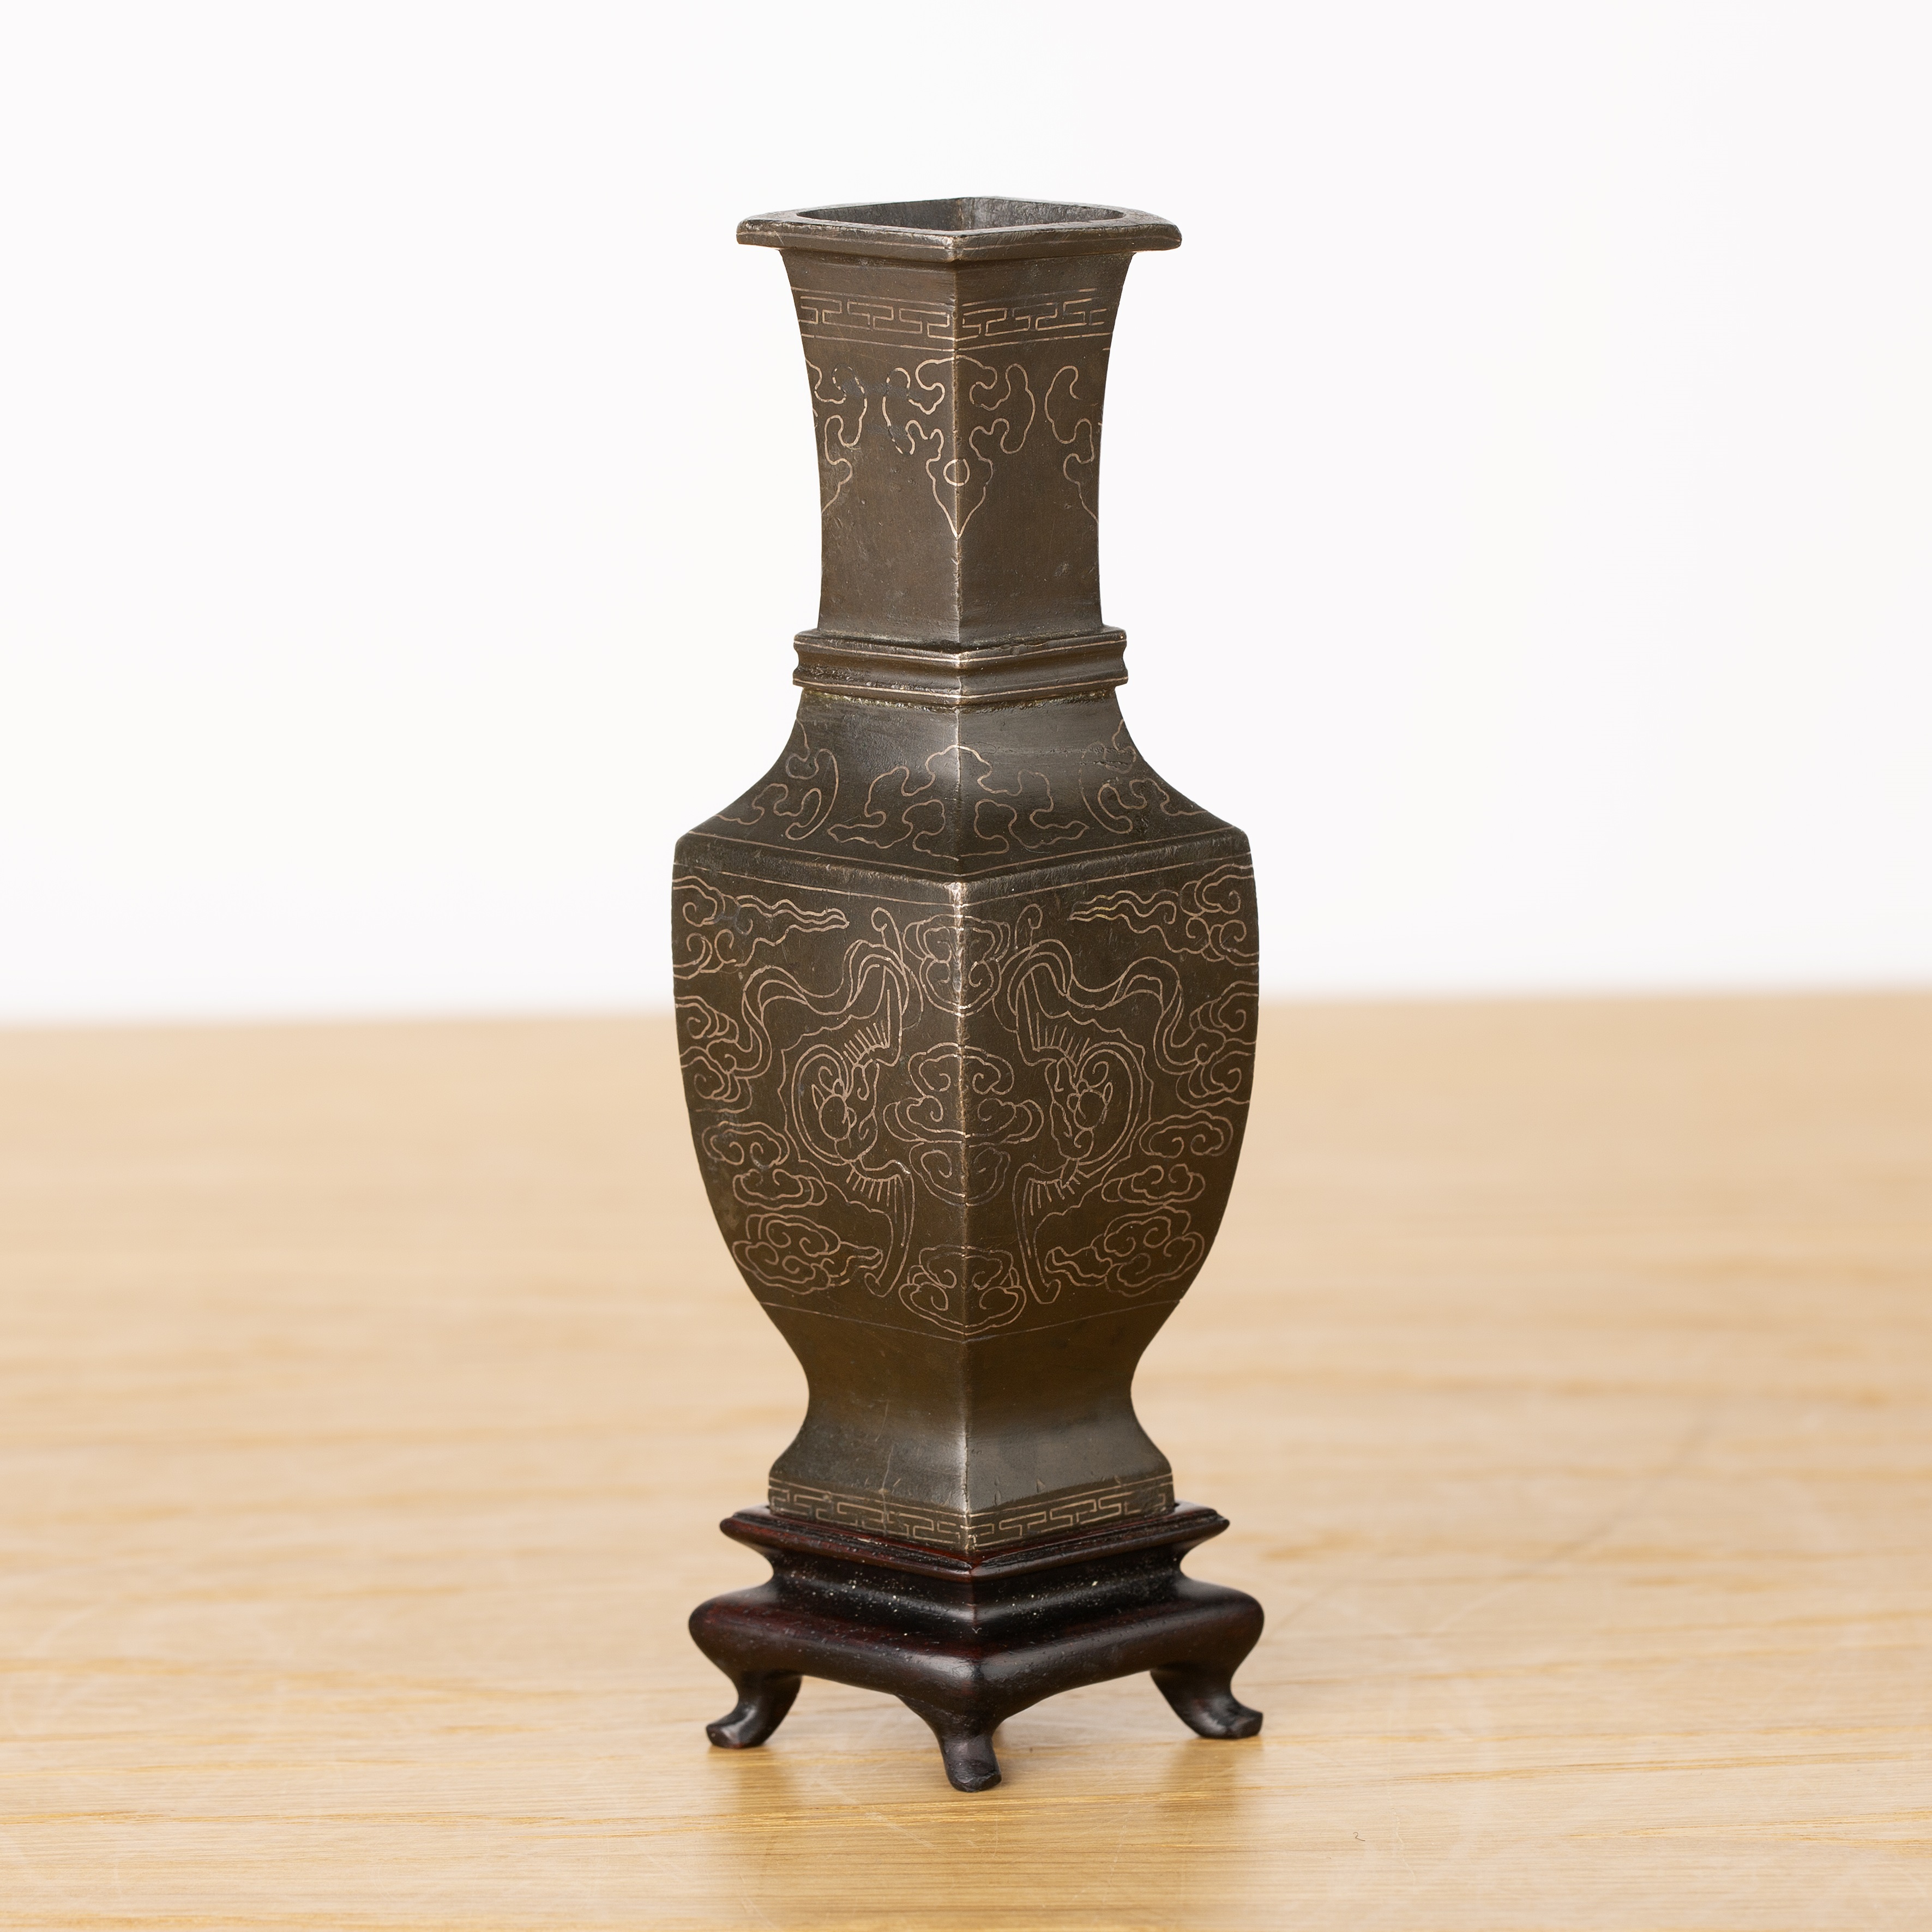 Miniature bronze inlaid archaic form vessel Chinese, late 19th Century signed Shisou, decorated with - Image 2 of 3